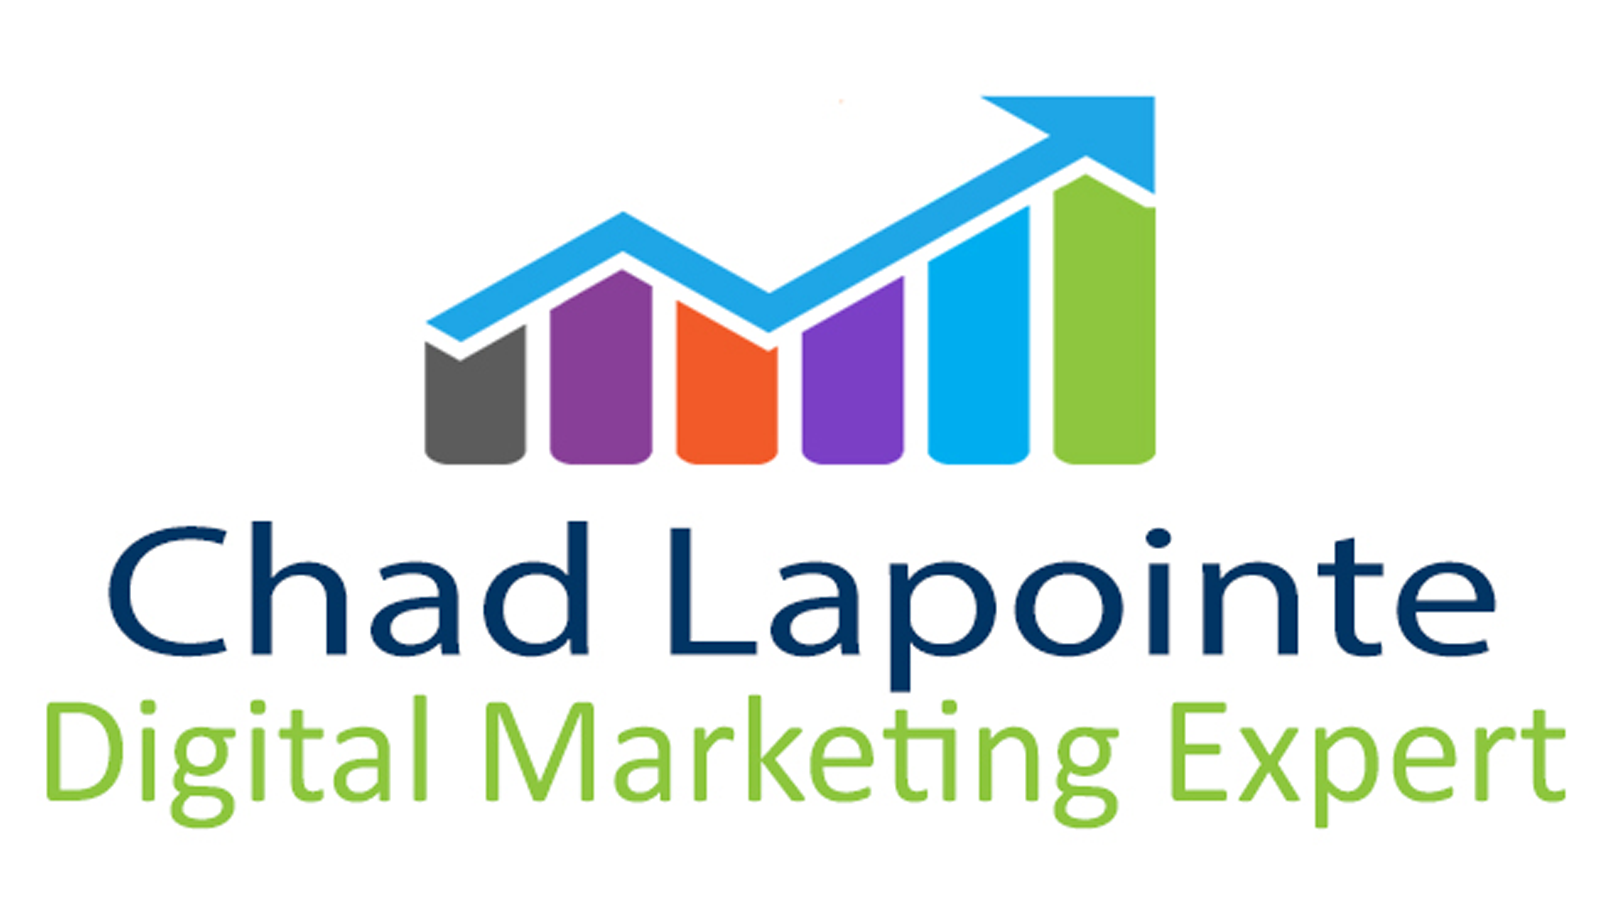 Digital Marketing Expert profile on Qualified.One